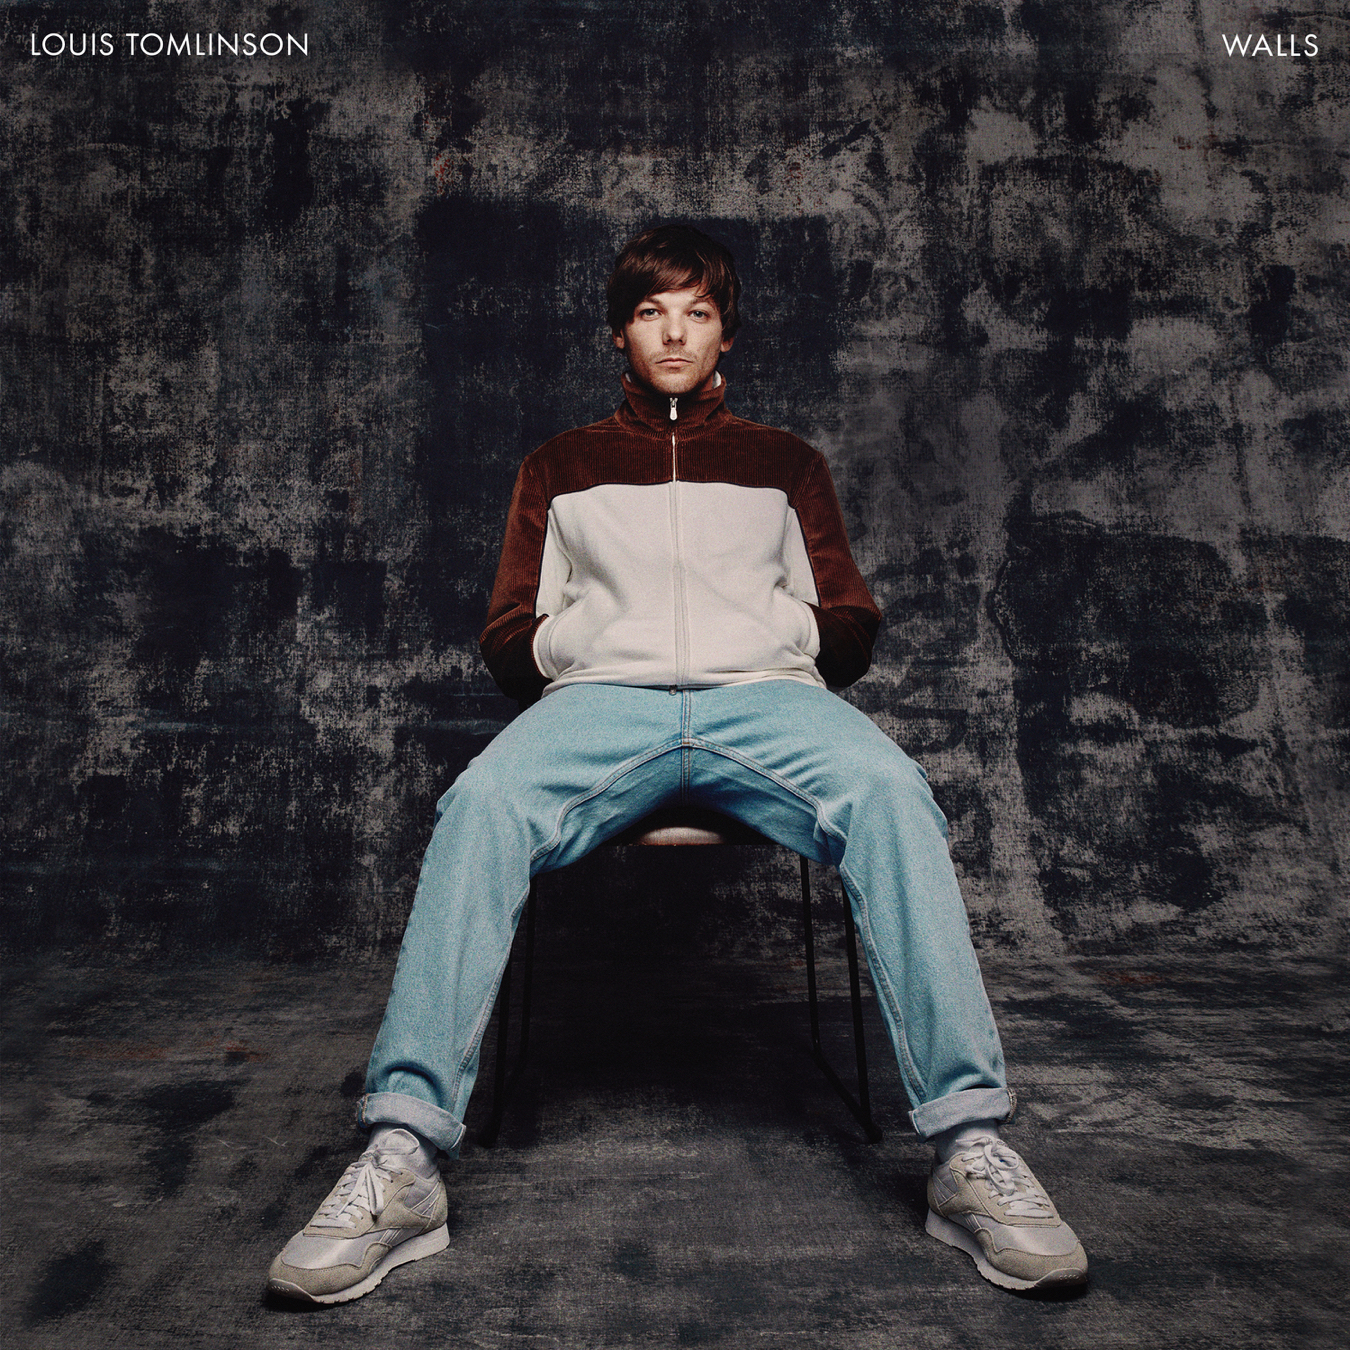 To celebrate one year since our Louis Tomlinson cover, here's the